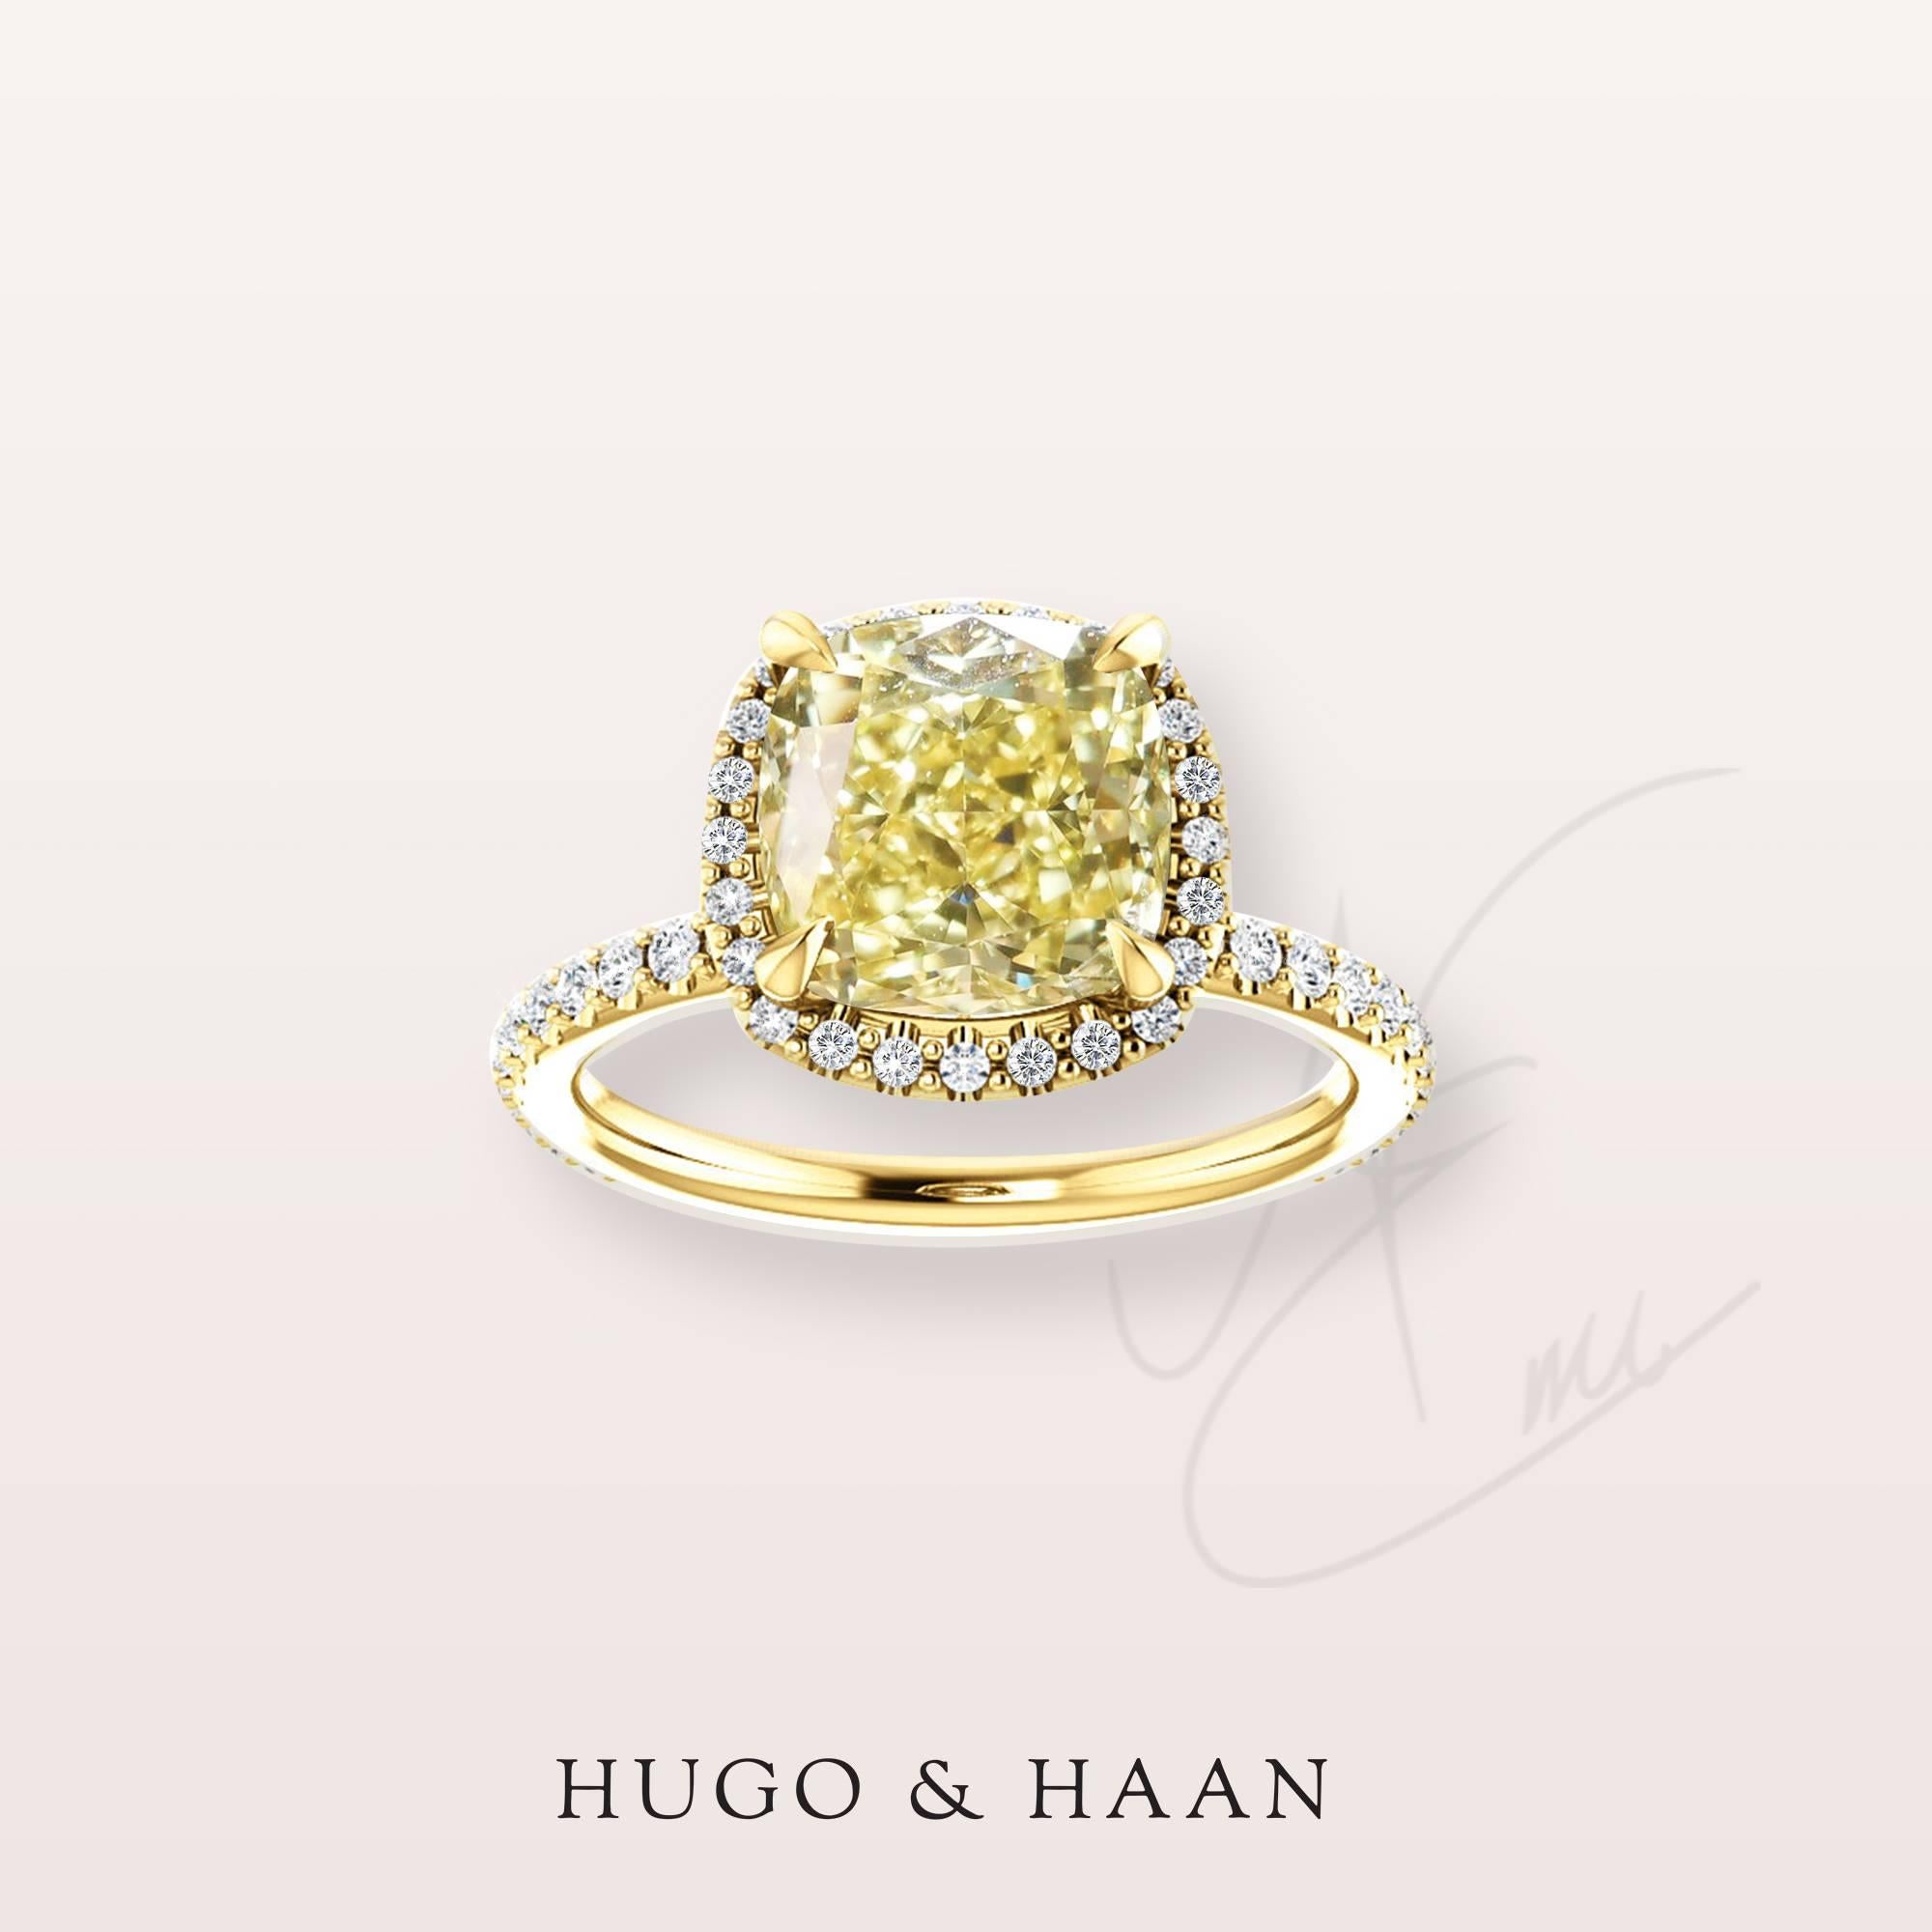 Details:

Material : 18k Yellow Gold
Principle Gemstone : Cushion Cut Yellow Diamond
Other Gemstone : White Diamond Pave
Total Diamond Carat Weight : over 2 tcw 
Diamonds Certified: Yes - GIA certified
Customizable: Yes

Options to customize: